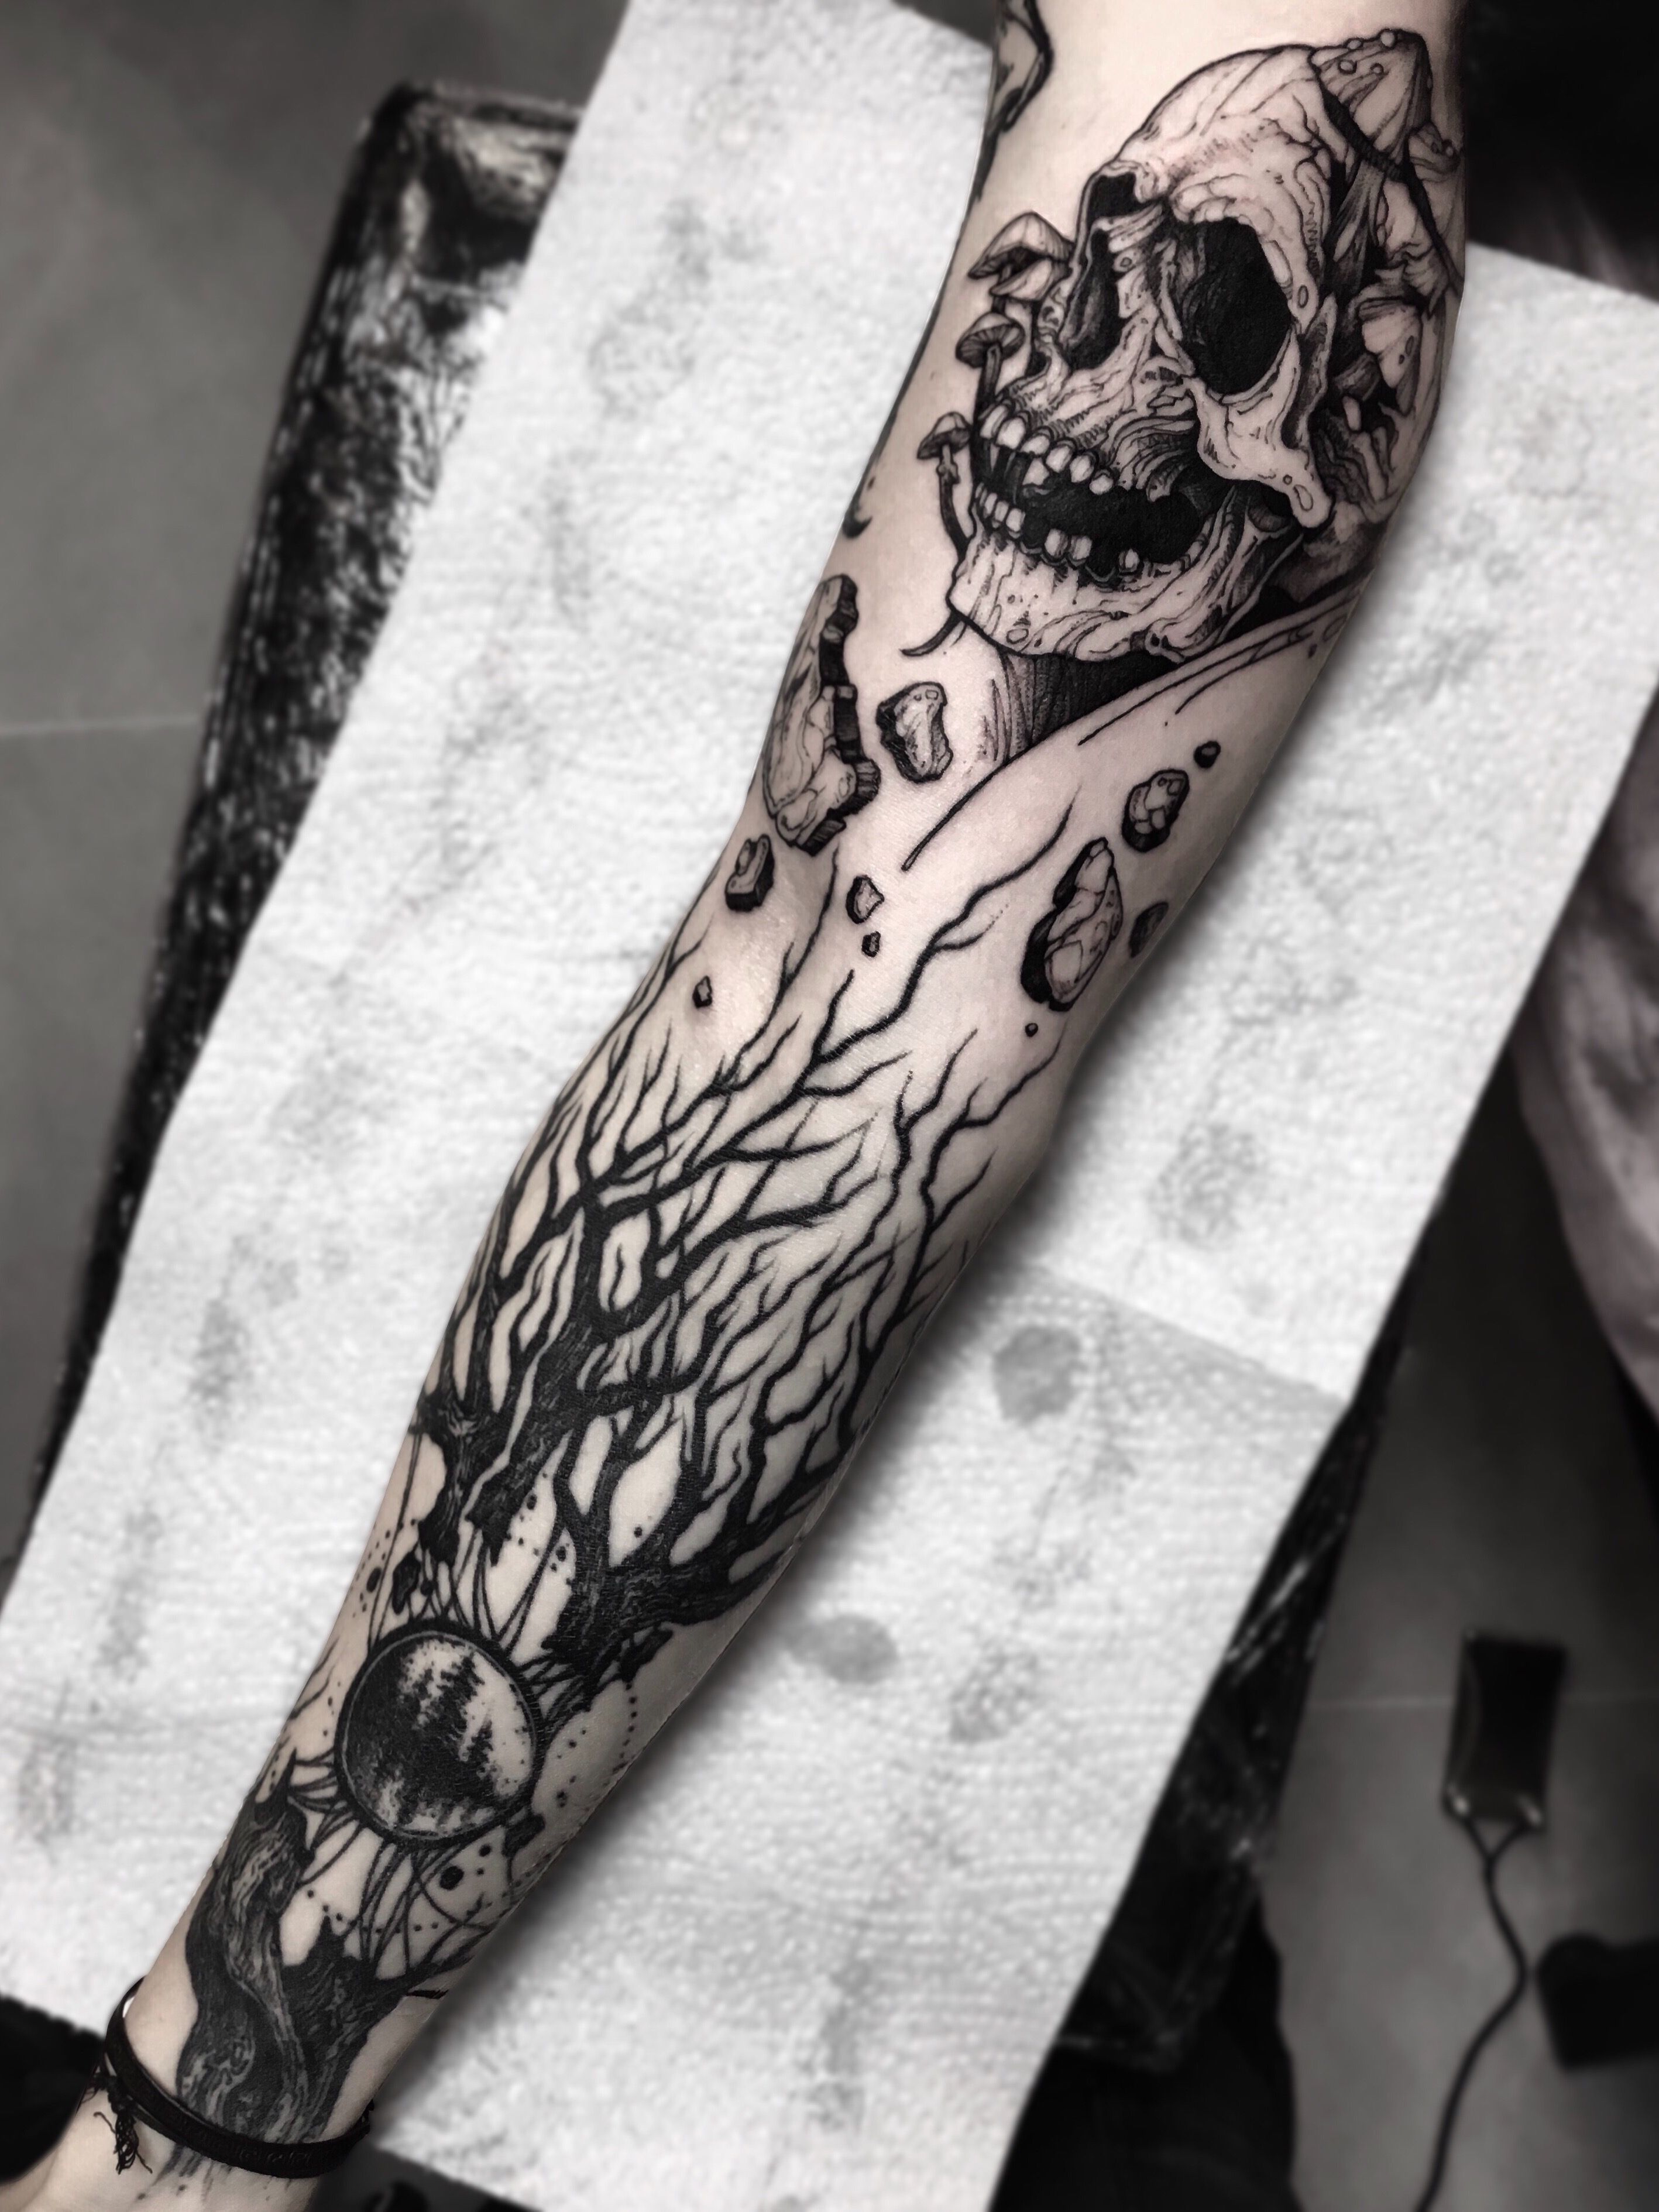 HandXăm Tattoo  A small event for reopening orders and bookings from  HandXăm Tattoo New artist in town Mars Black in dark style is giving out  mini tattoos of his designs from